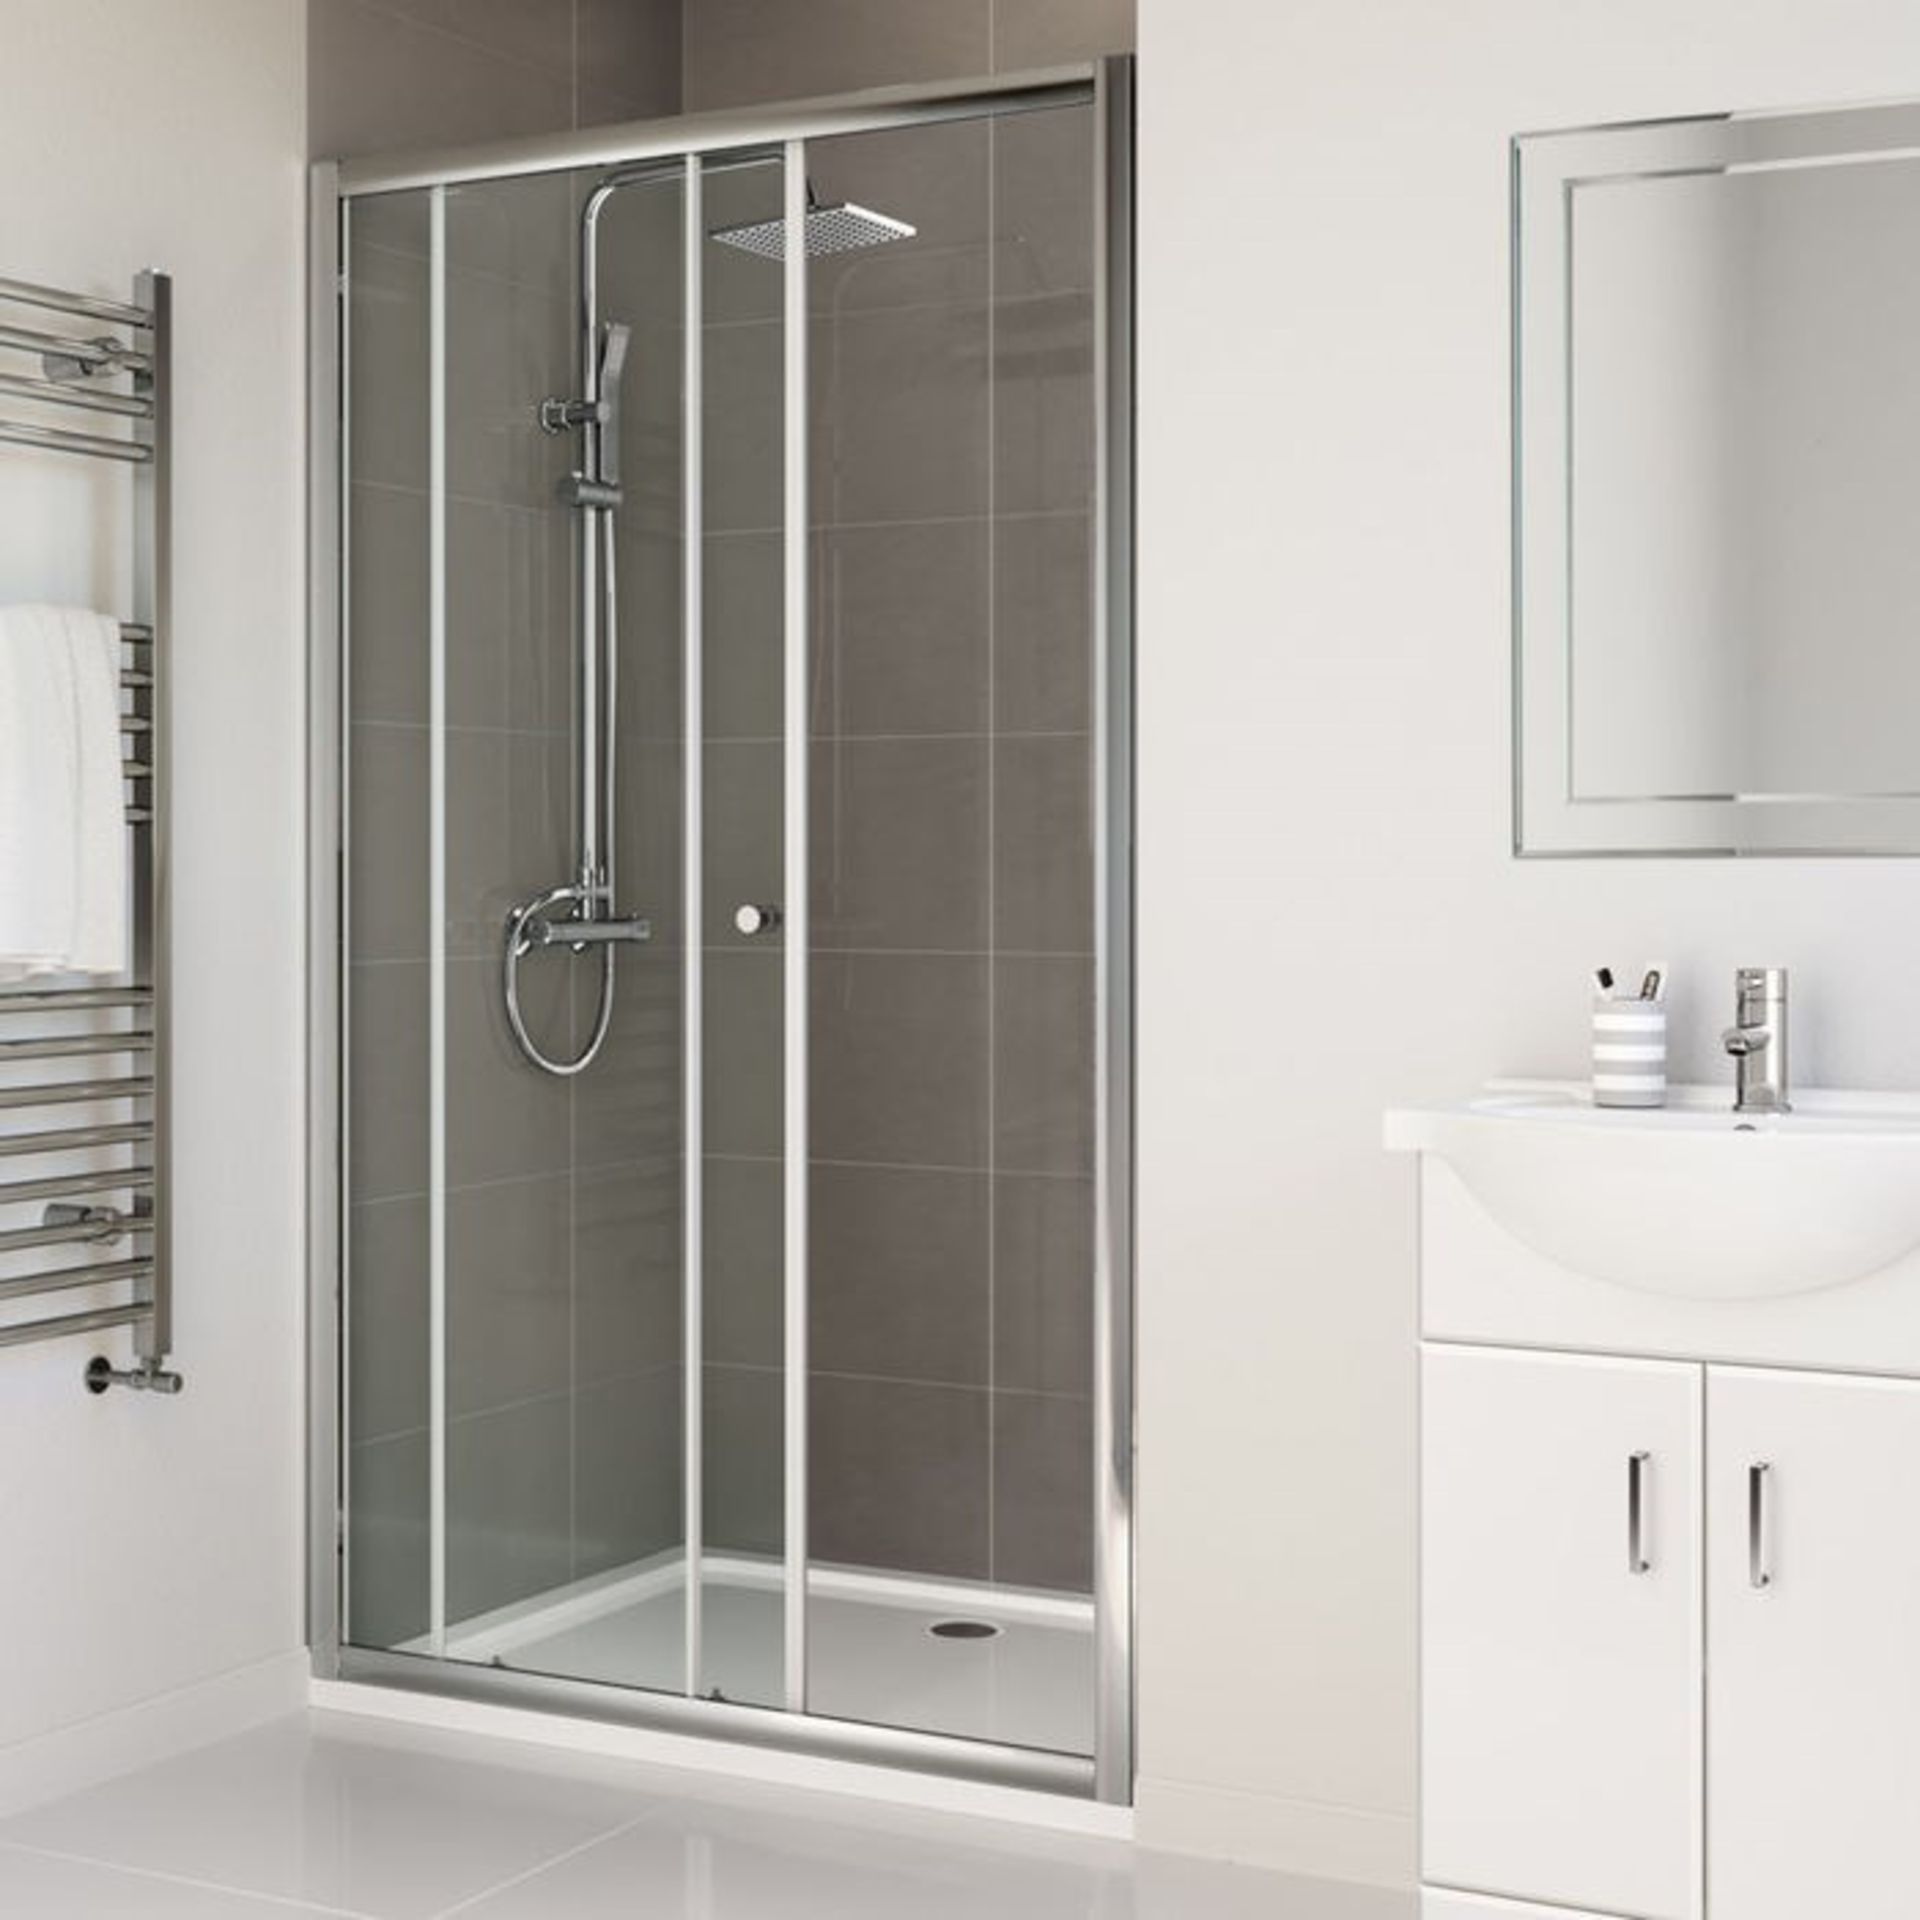 NEW (NS63) 1500mm - Elements Sliding Shower Door. RRP £399.99.8mm Safety Glass Fully waterproo... - Image 3 of 3